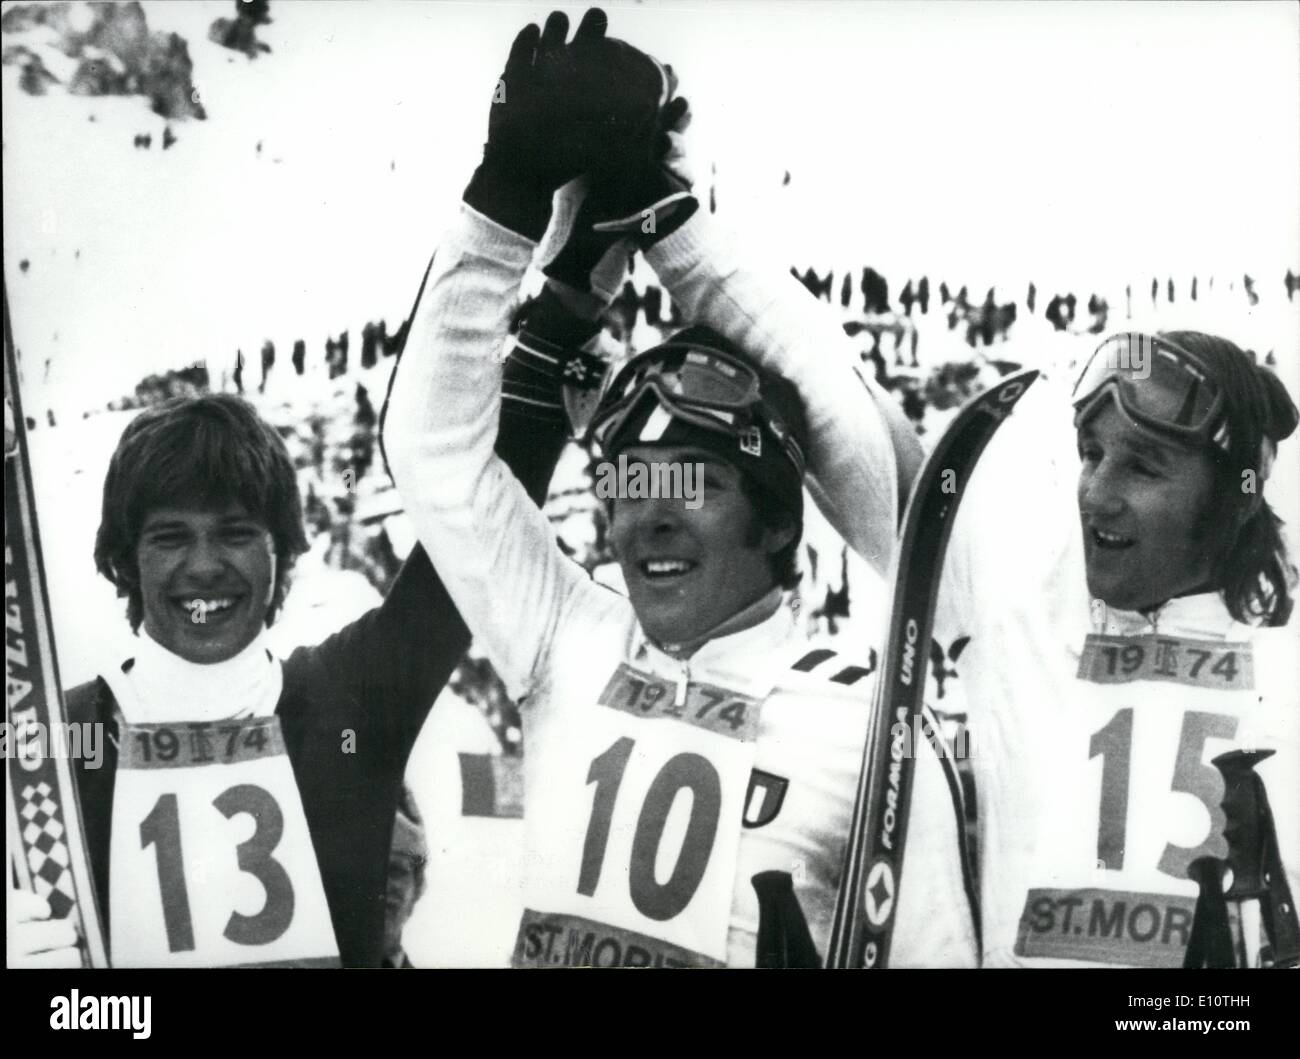 Feb. 02, 1974 - Ski-World Championship in St. Moritz: Tuesday, Italian Gustavo Thoeni already Olympic champion and world champion 1972 in Sapporo, renewed his triumph in this year's competition in St. Moritz by winning the giant slalom. Second Austrian Hansi Hinterseer (left), third Italian Piero Gros (right) Stock Photo